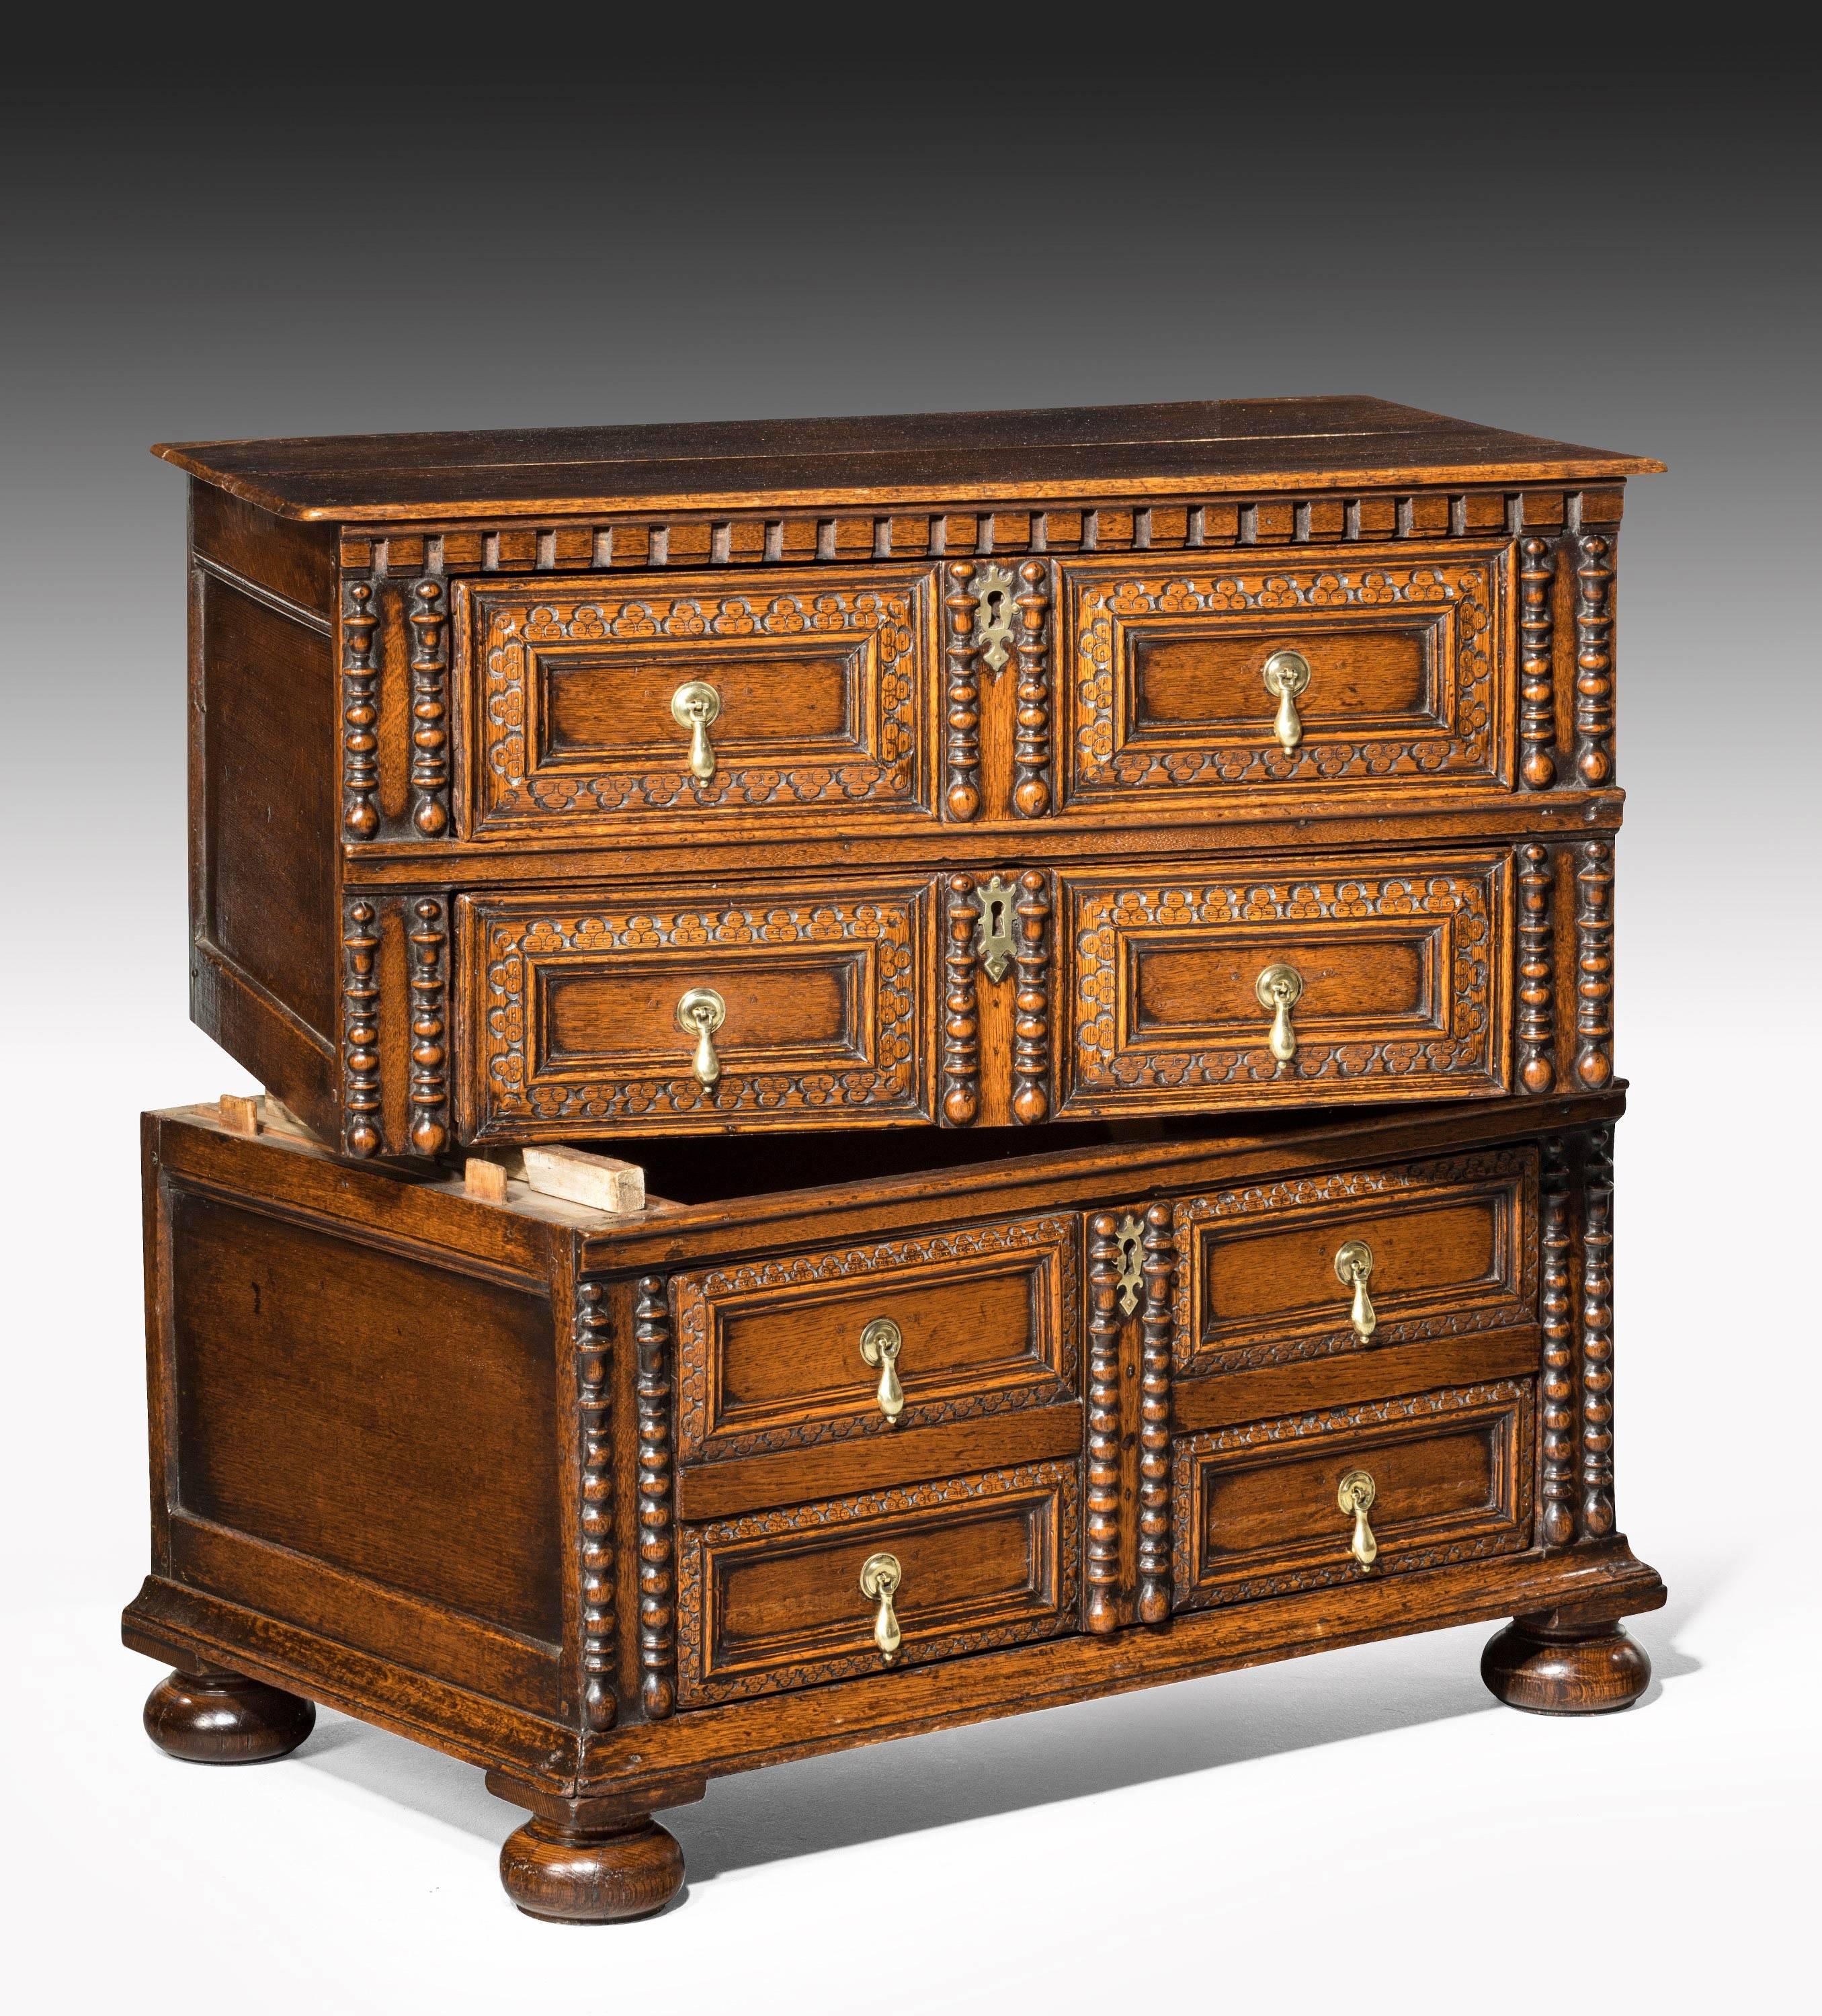 English Late 17th Century Oak Chest of Drawers with Scratch and Deep Carving